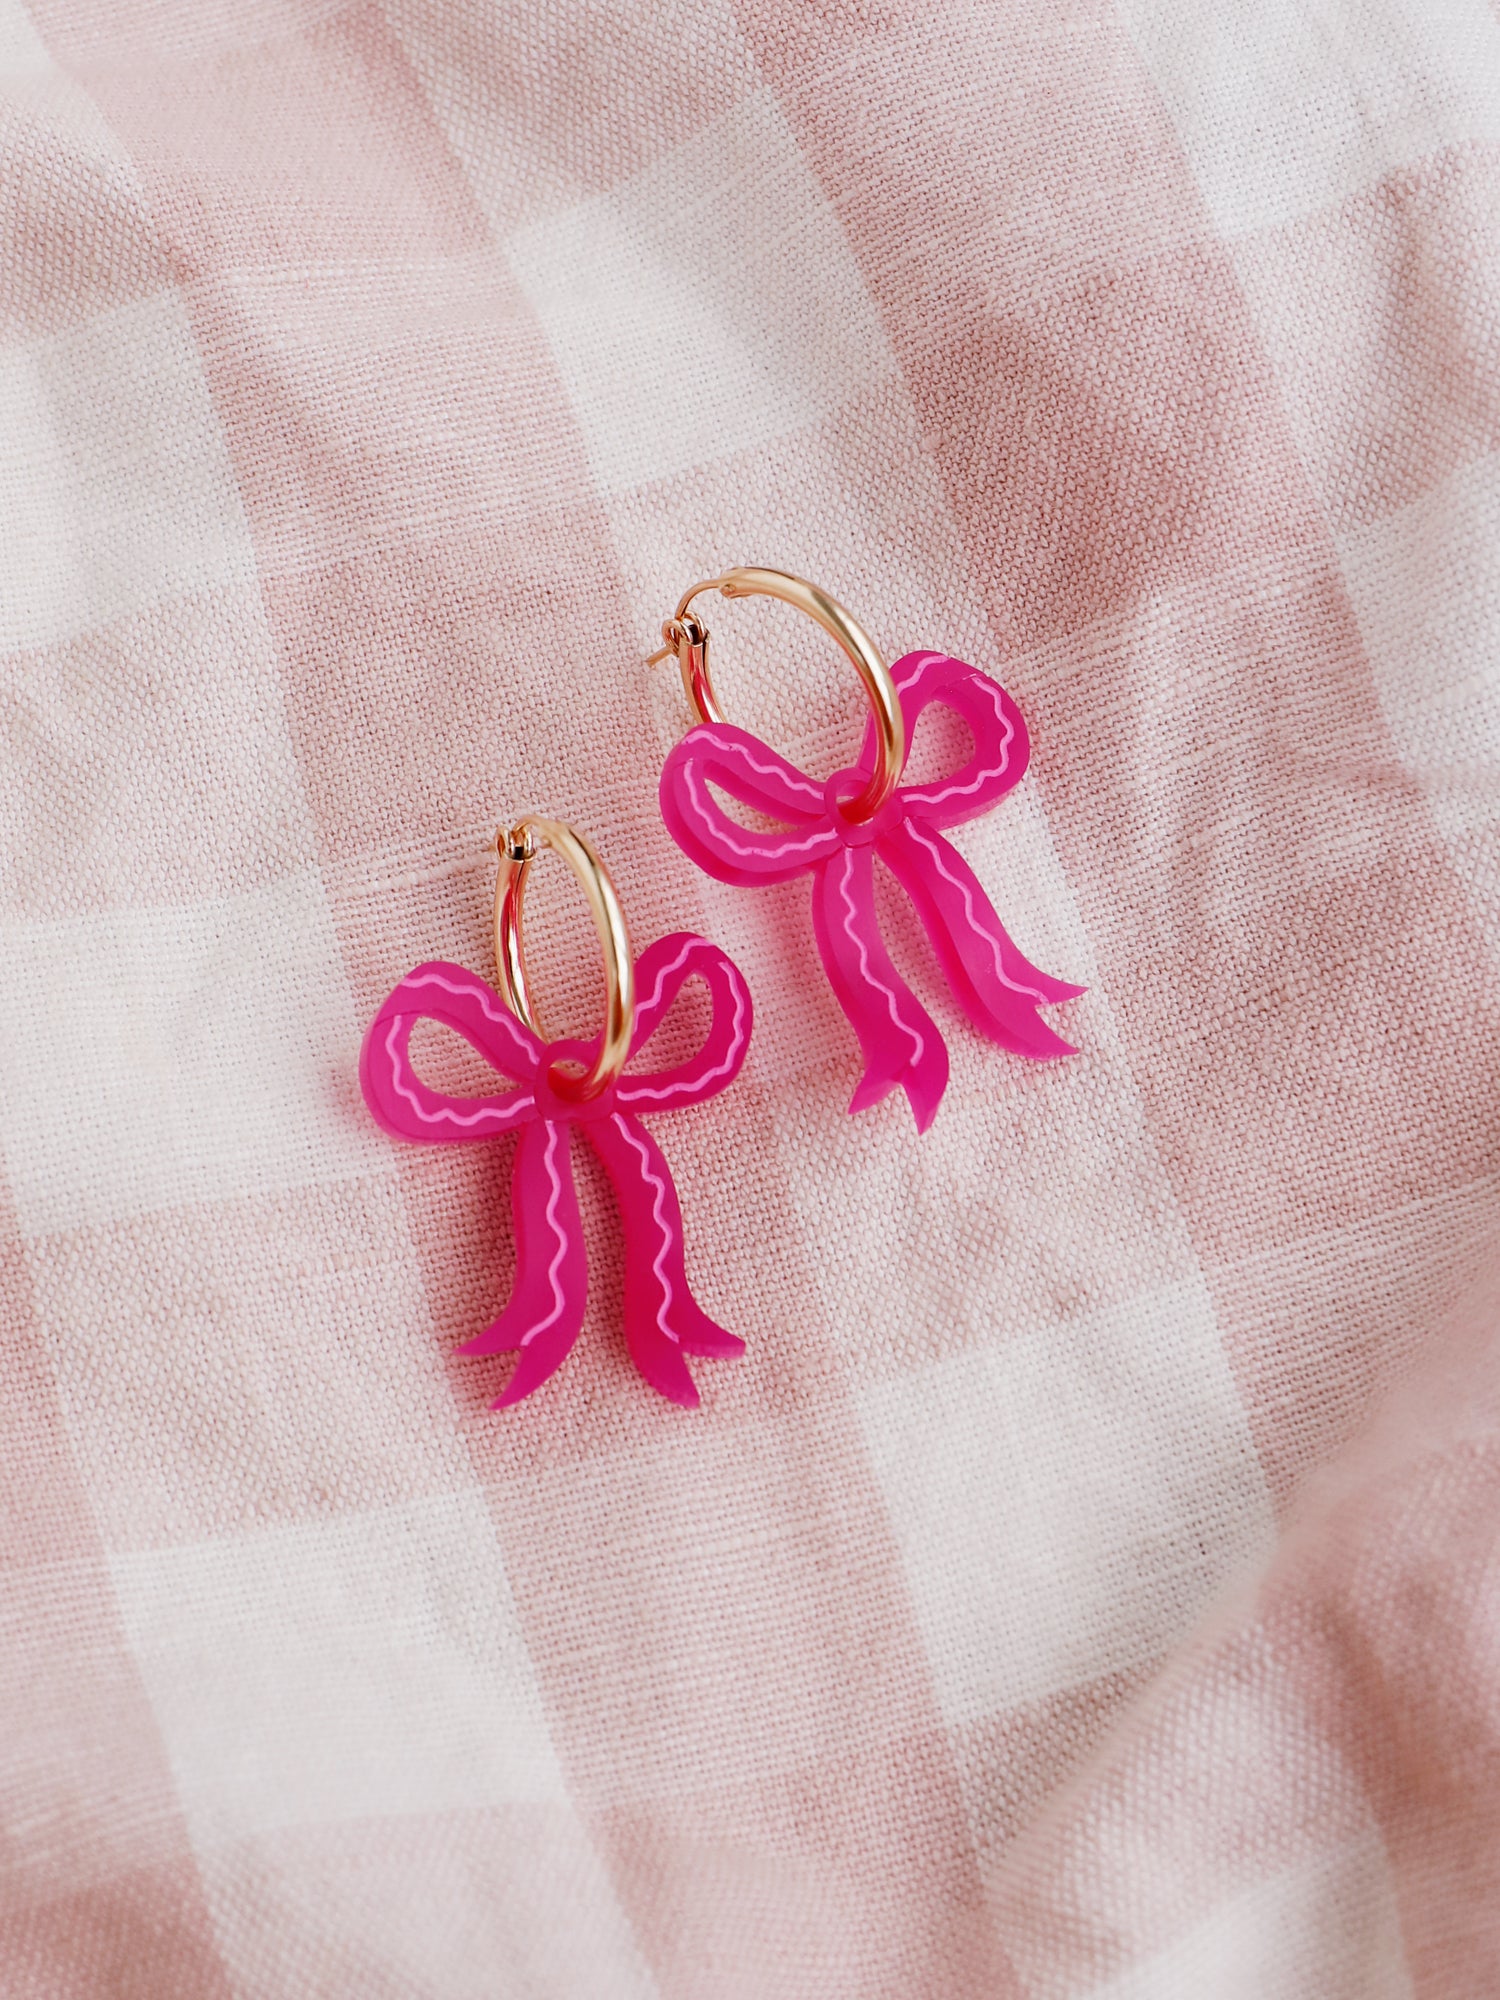 Romantic mini bow earrings in a recycled pink made from velvety marbled acrylic with hand-inked details. Surprisingly lightweight so can be worn for extended periods of time. Each bow is hand-sculpted into a 3D form giving it a lovely realistic ribbon-like effect. This also adds a unique charm to each one. Handmade by Wolf & Moon in the UK. ⁠